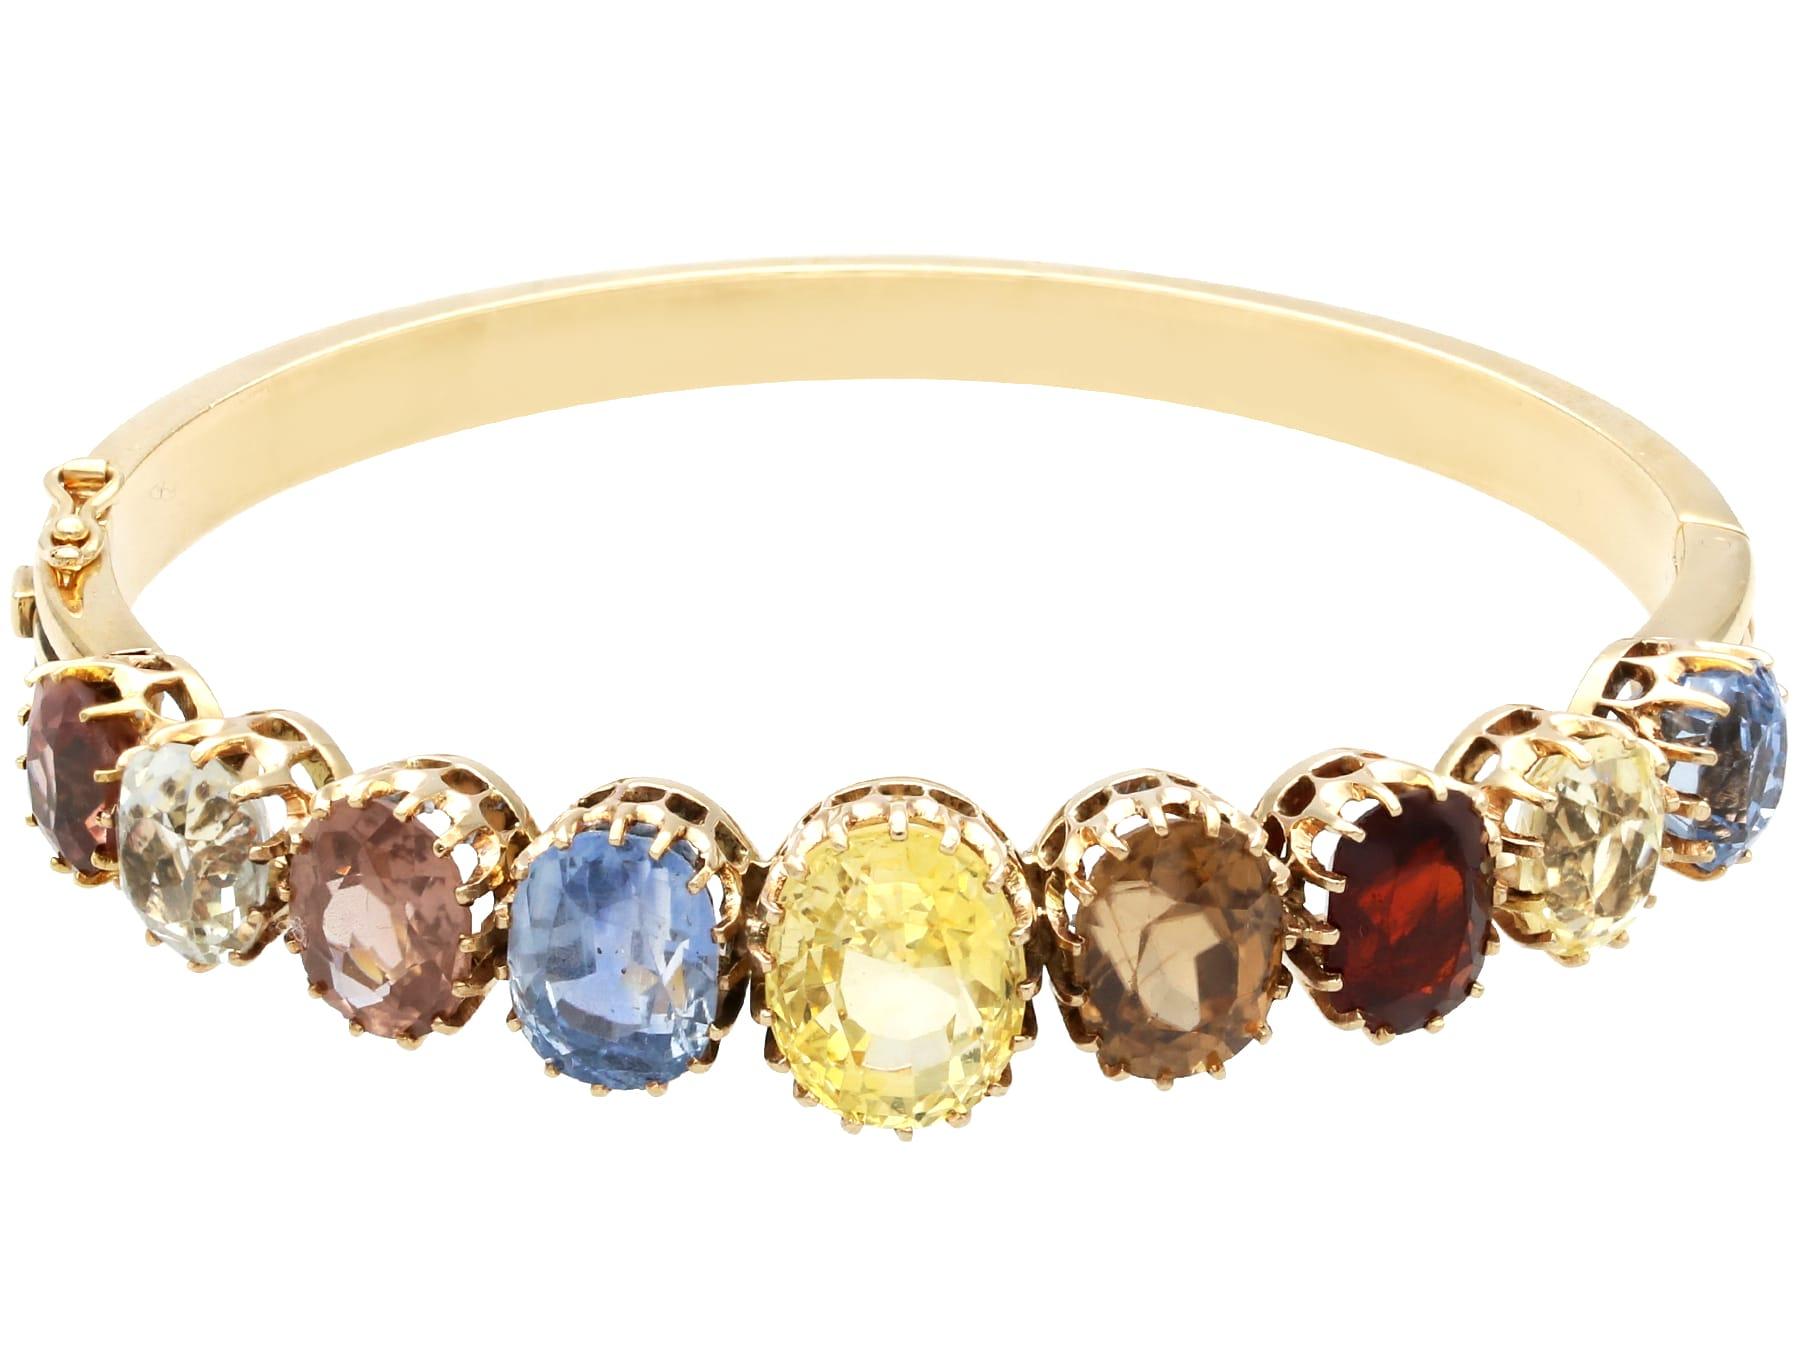 Victorian Multi-Gemstone 9k Yellow Gold Bangle In Excellent Condition For Sale In Jesmond, Newcastle Upon Tyne